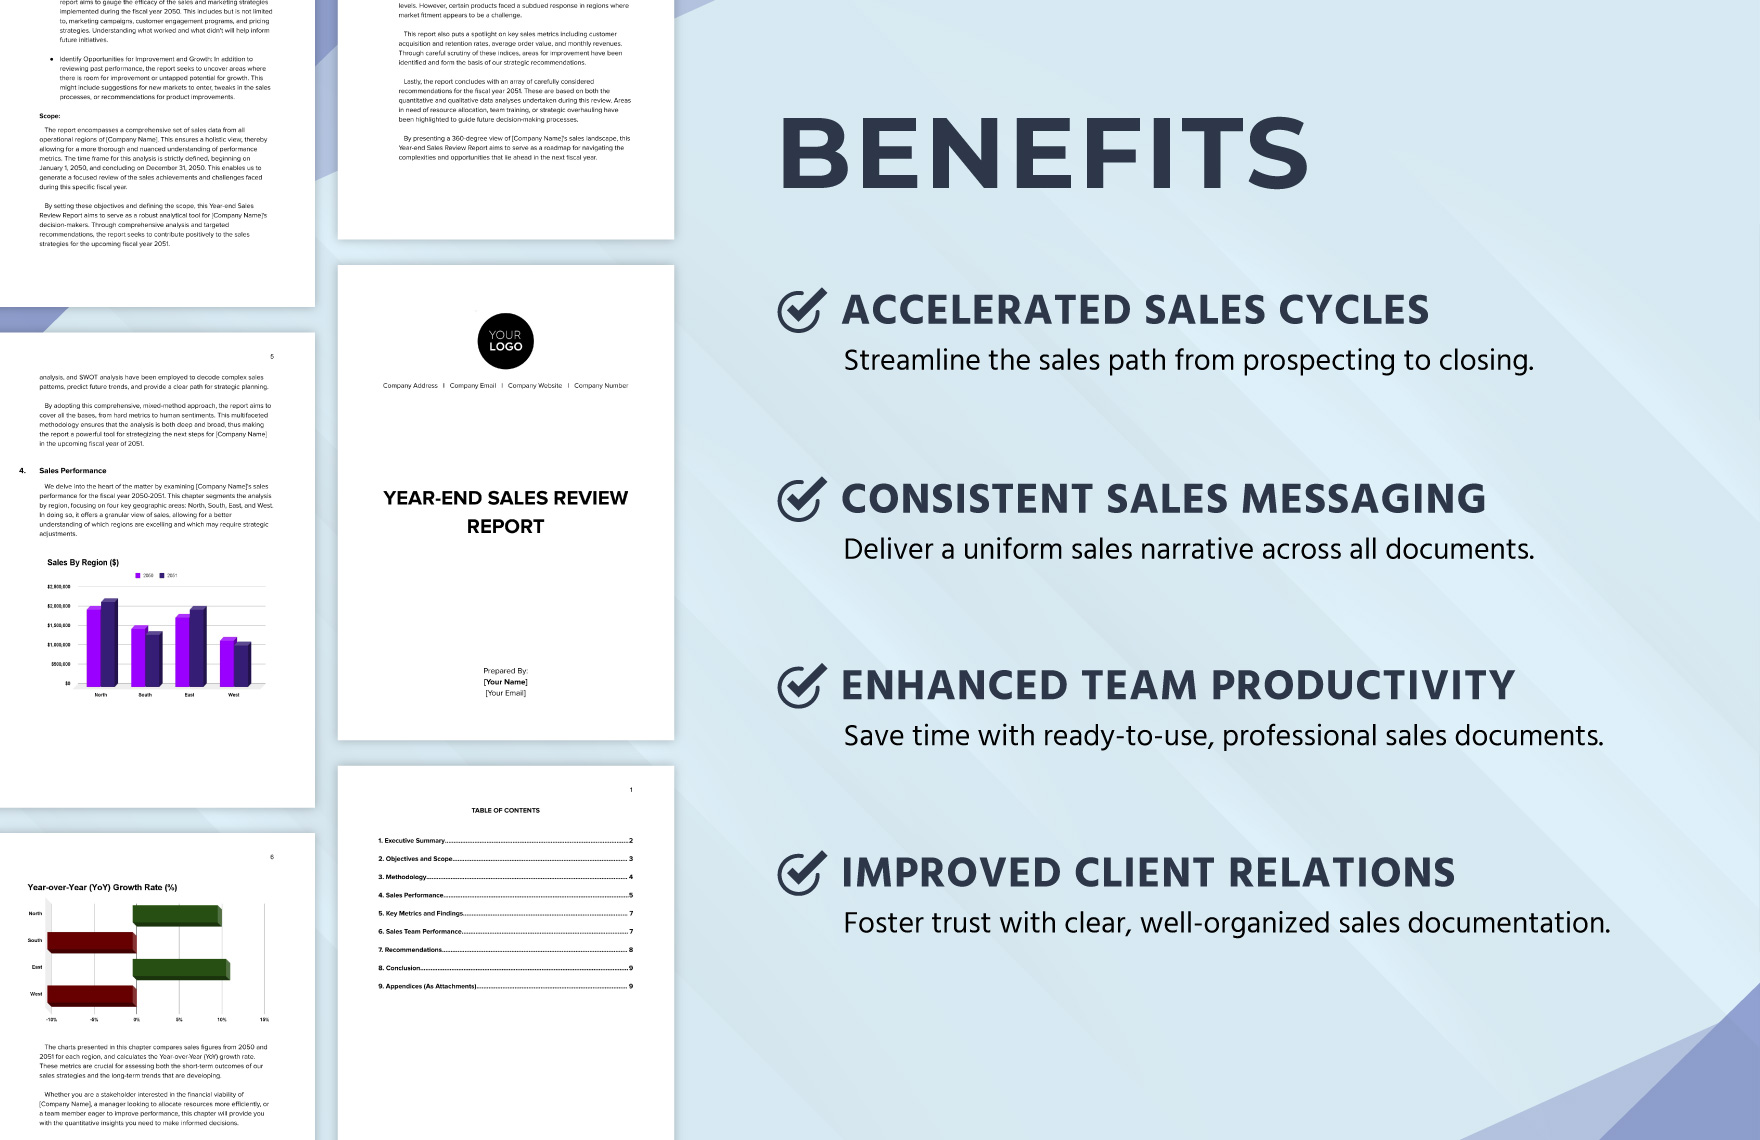 Year-end Sales Review Report Template